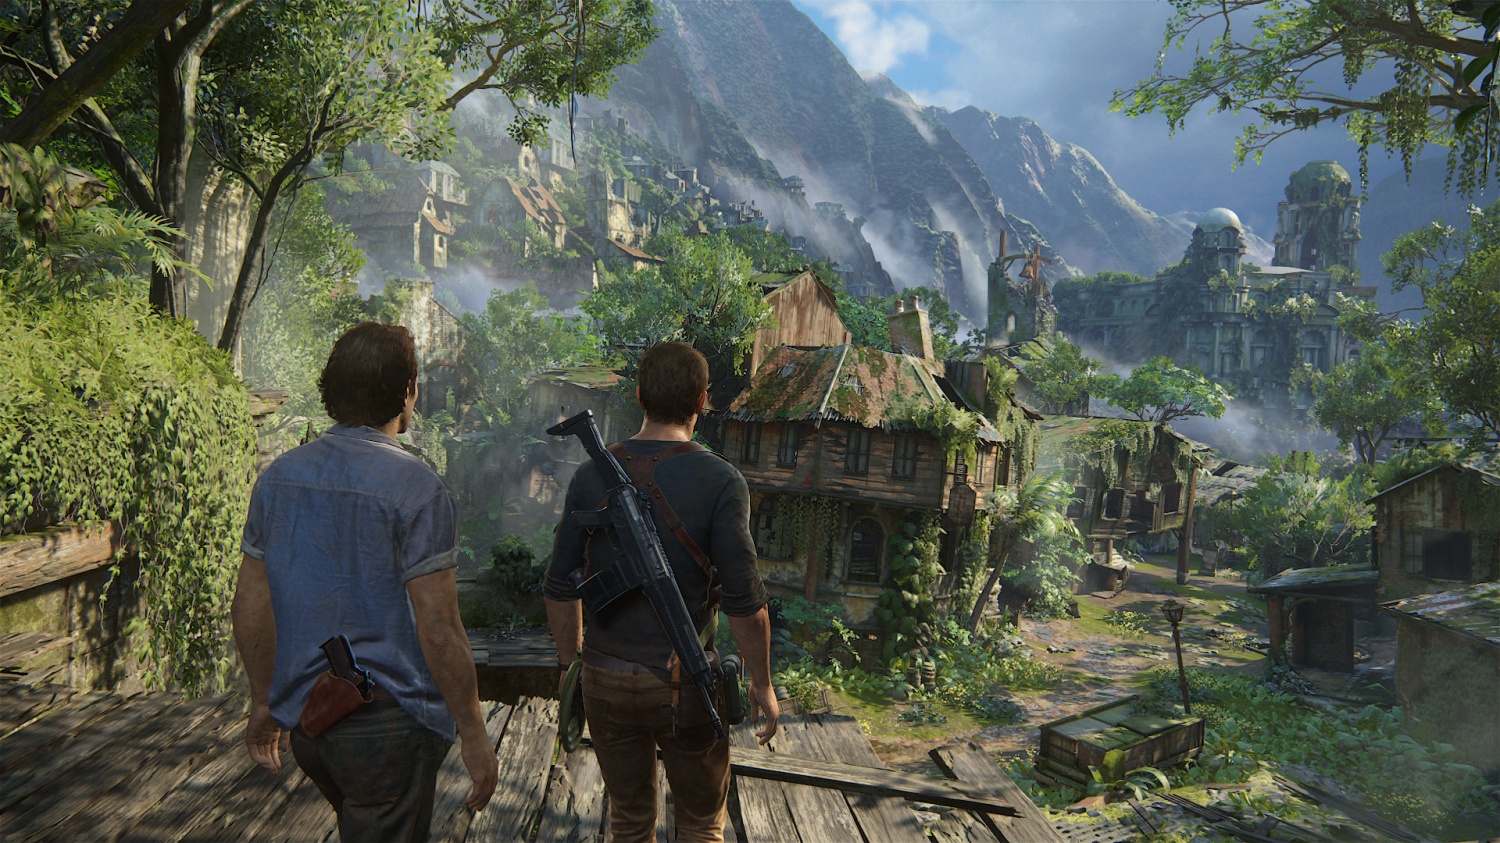 Tom Holland Loves The Latest Script Draft For Uncharted Movie